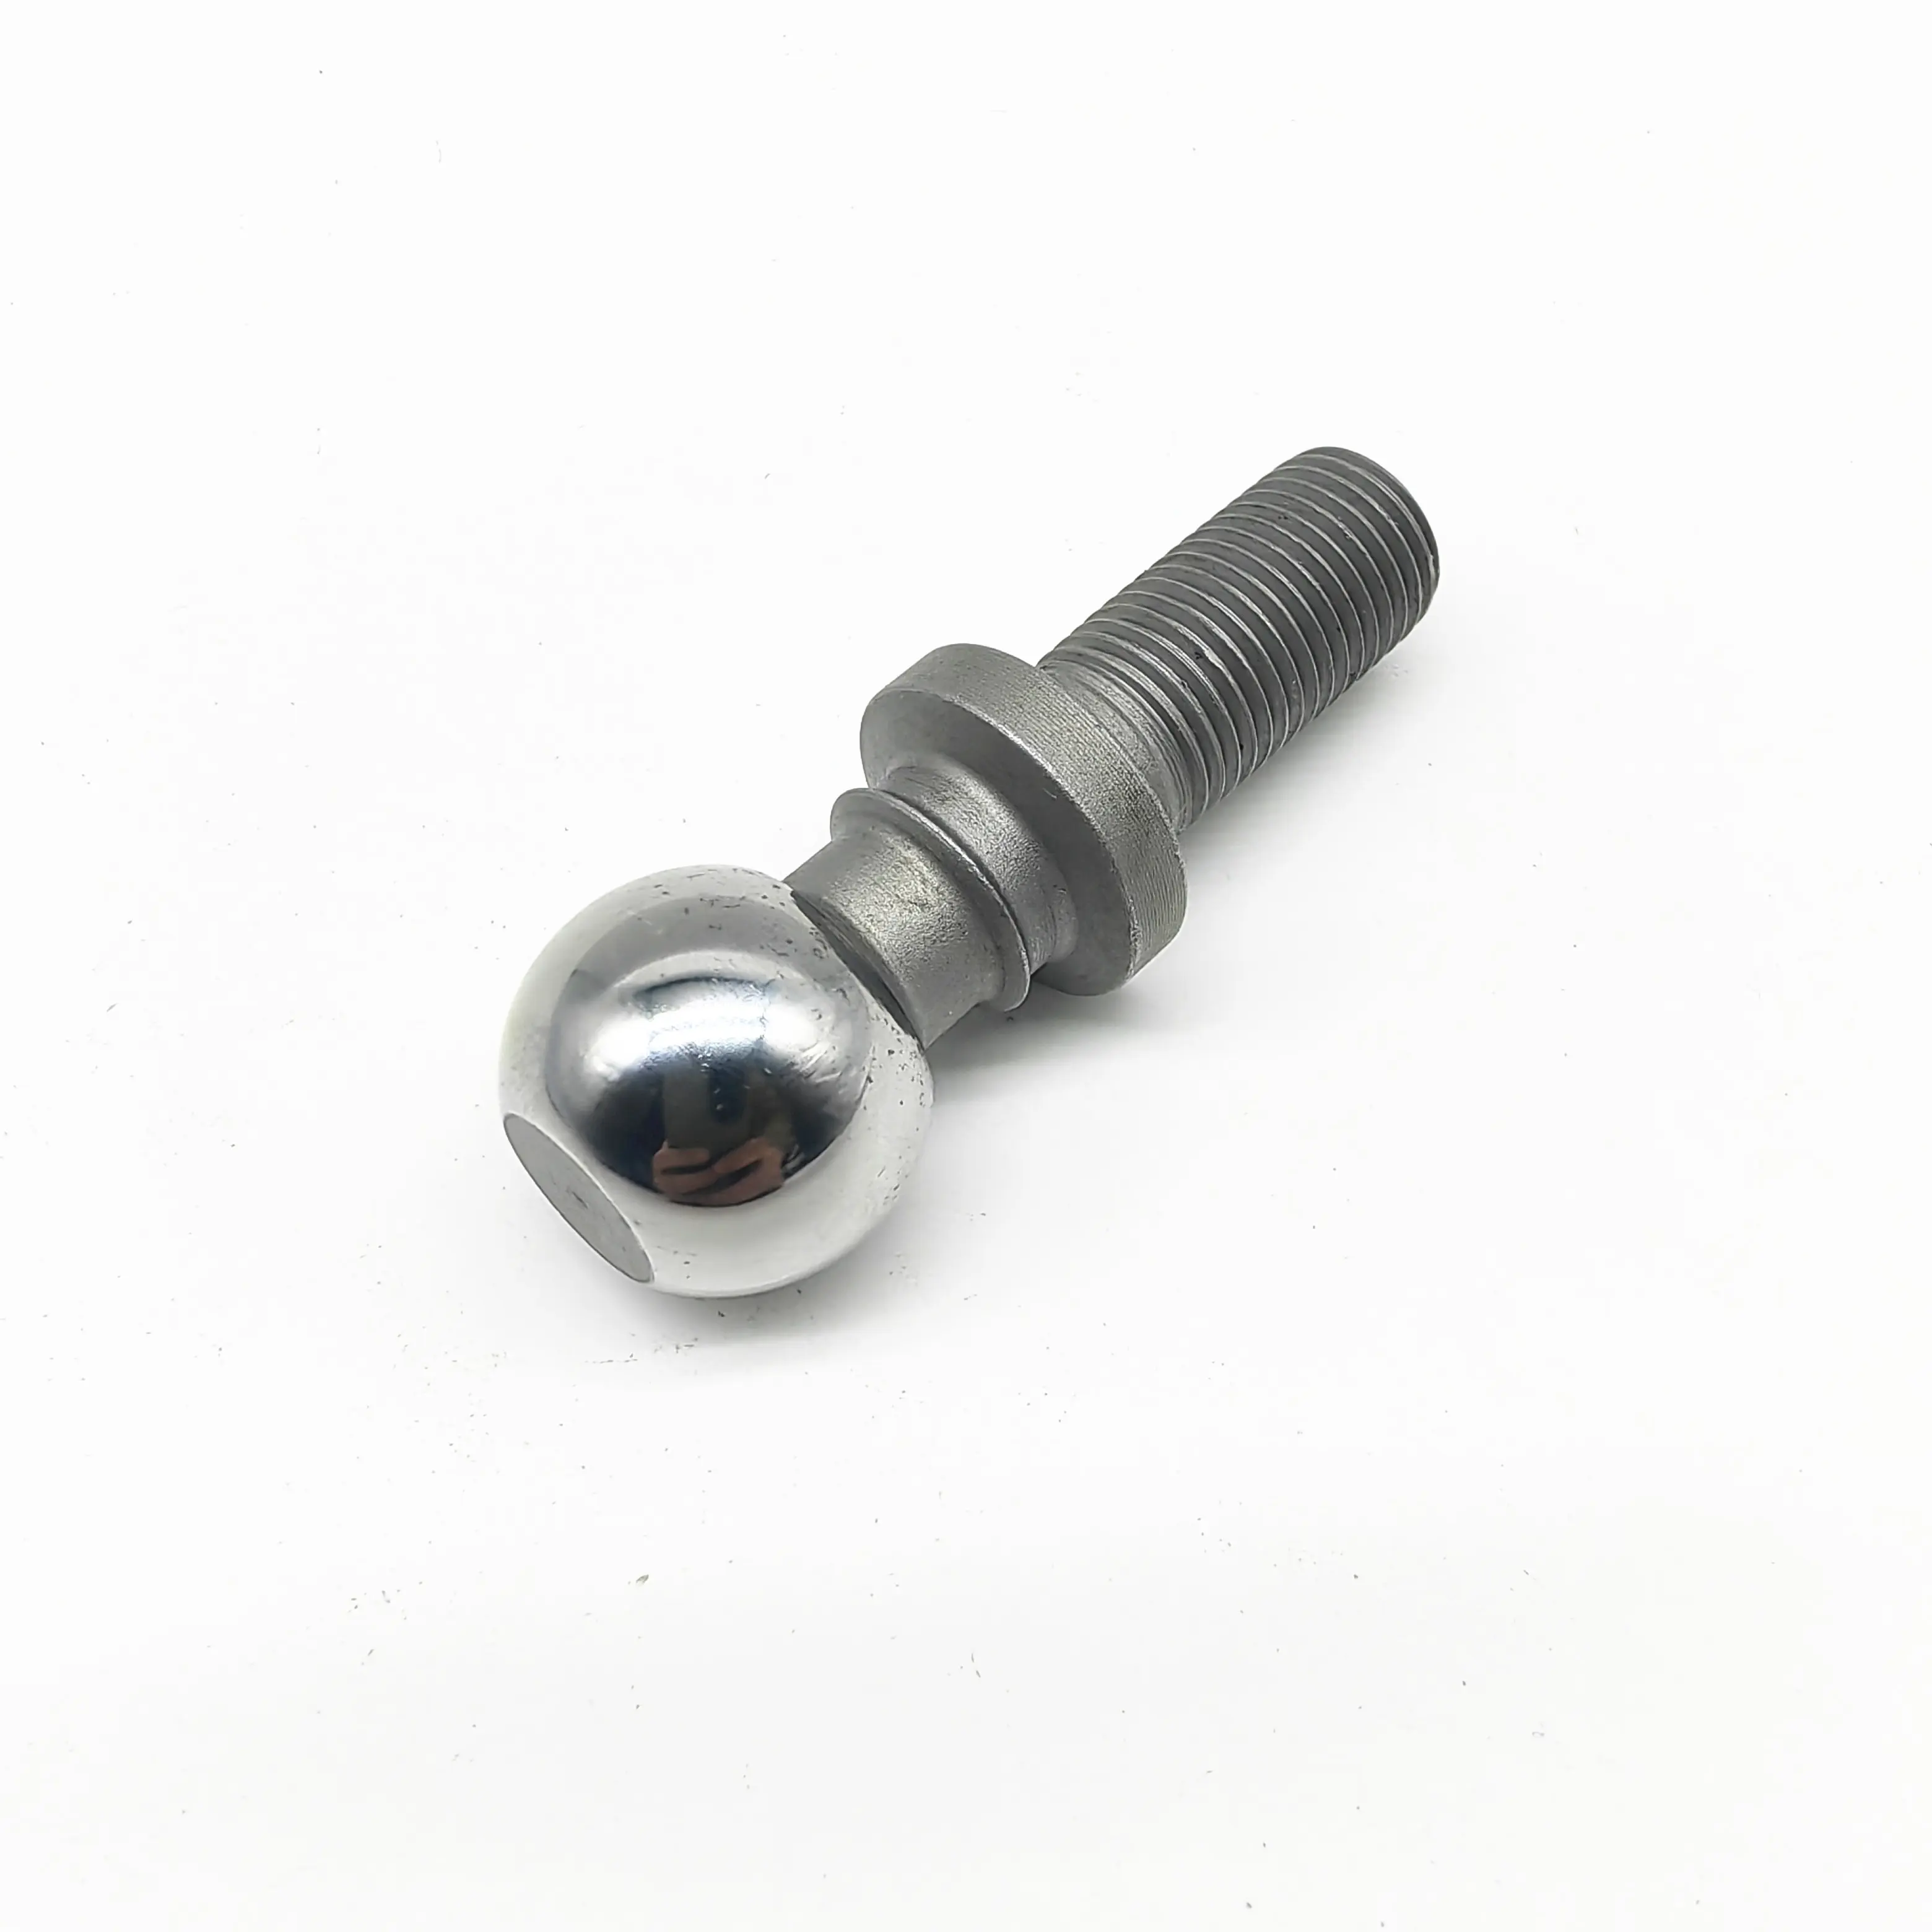 JKB57.4-20 Suspension Cold Forging Ball Pin for Sway Bar Link Essential Parts for Vehicle Stability